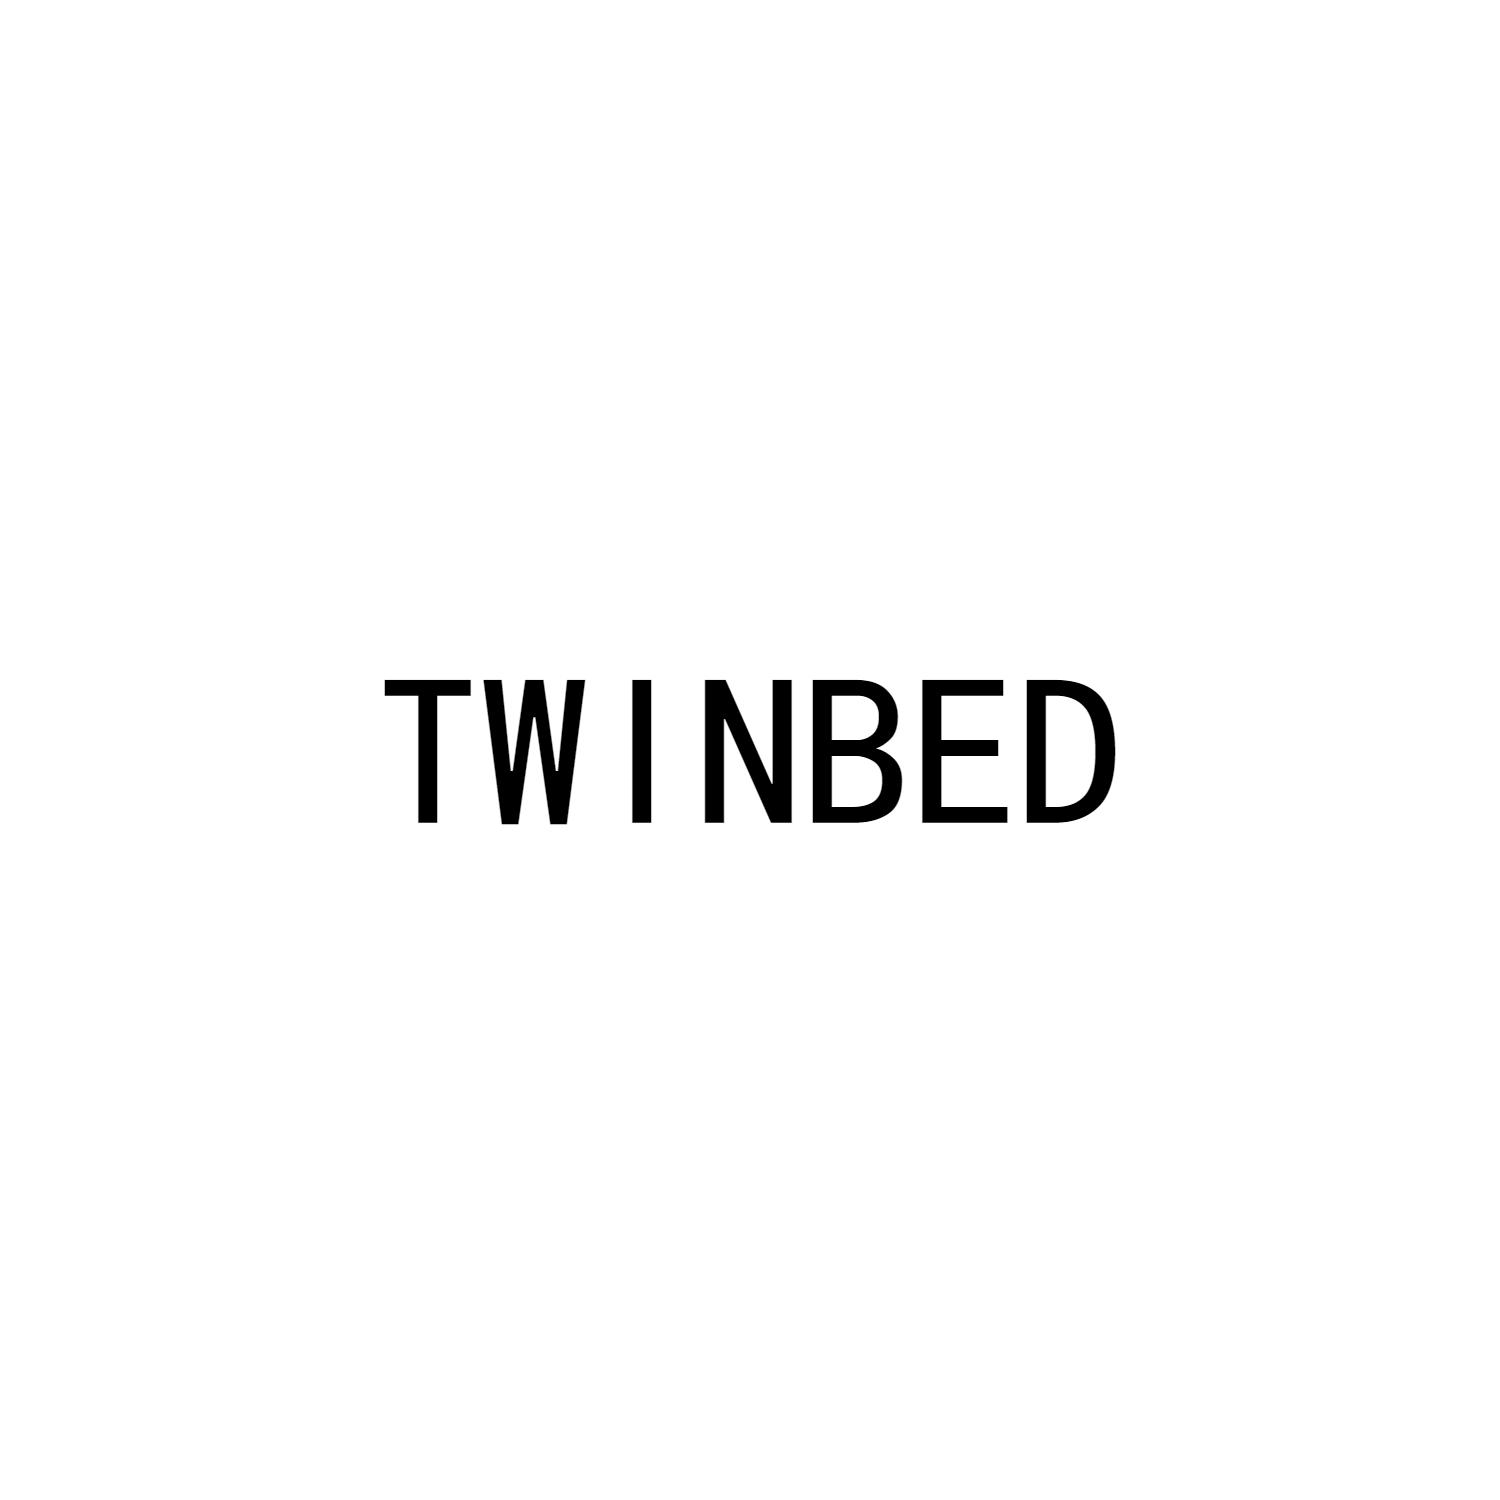 TWINBED